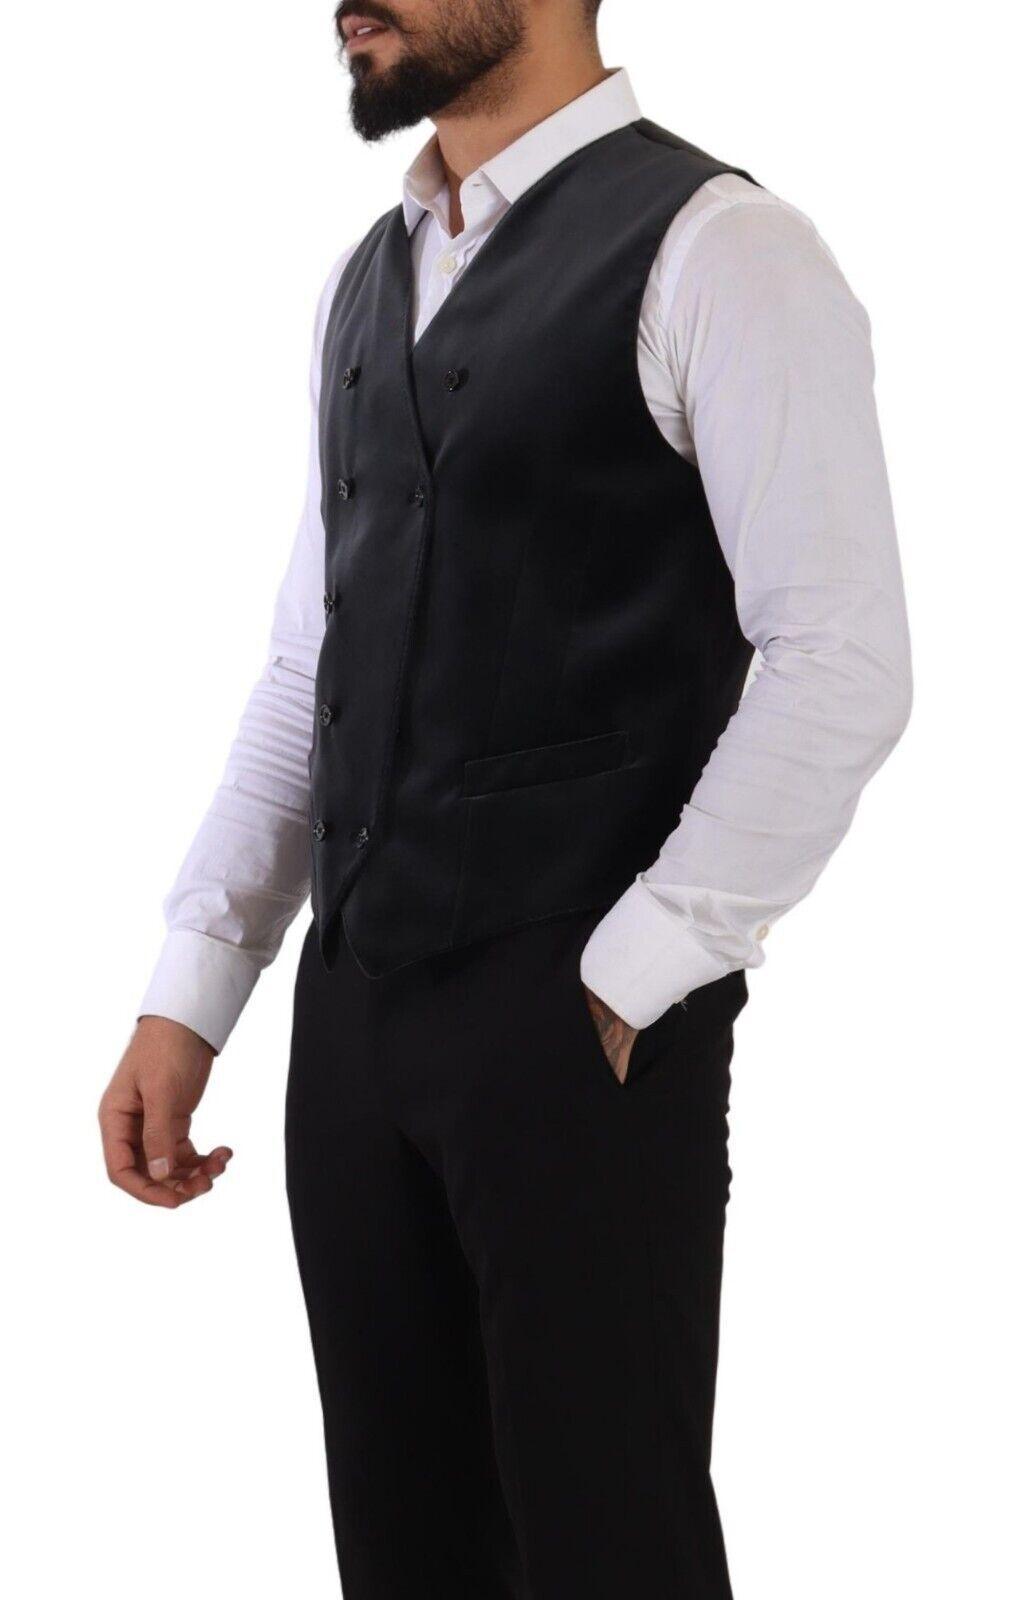 Gray Velvet Cotton Slim Fit Waistcoat Vest - Designed by Dolce & Gabbana Available to Buy at a Discounted Price on Moon Behind The Hill Online Designer Discount Store